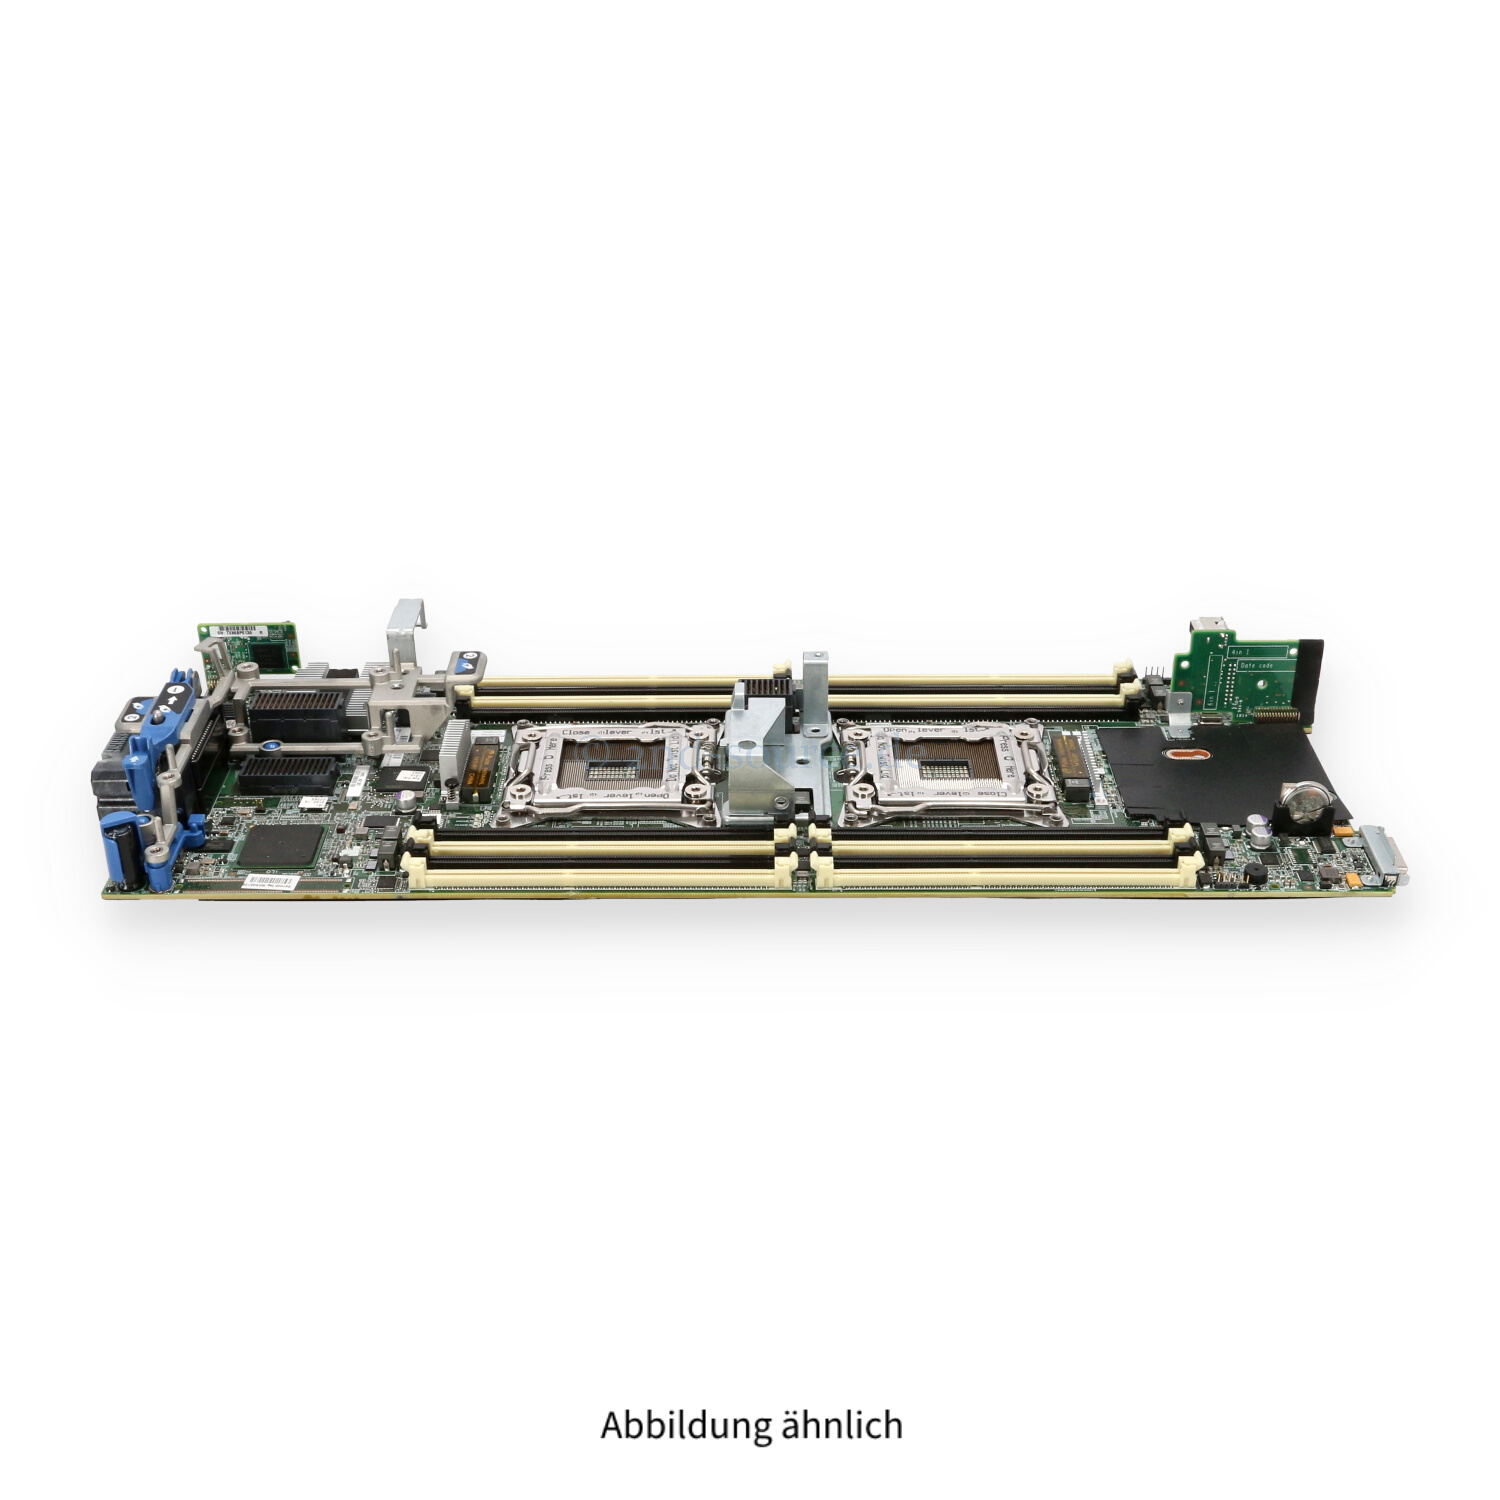 HPE Systemboard BL460c G8 861505-001